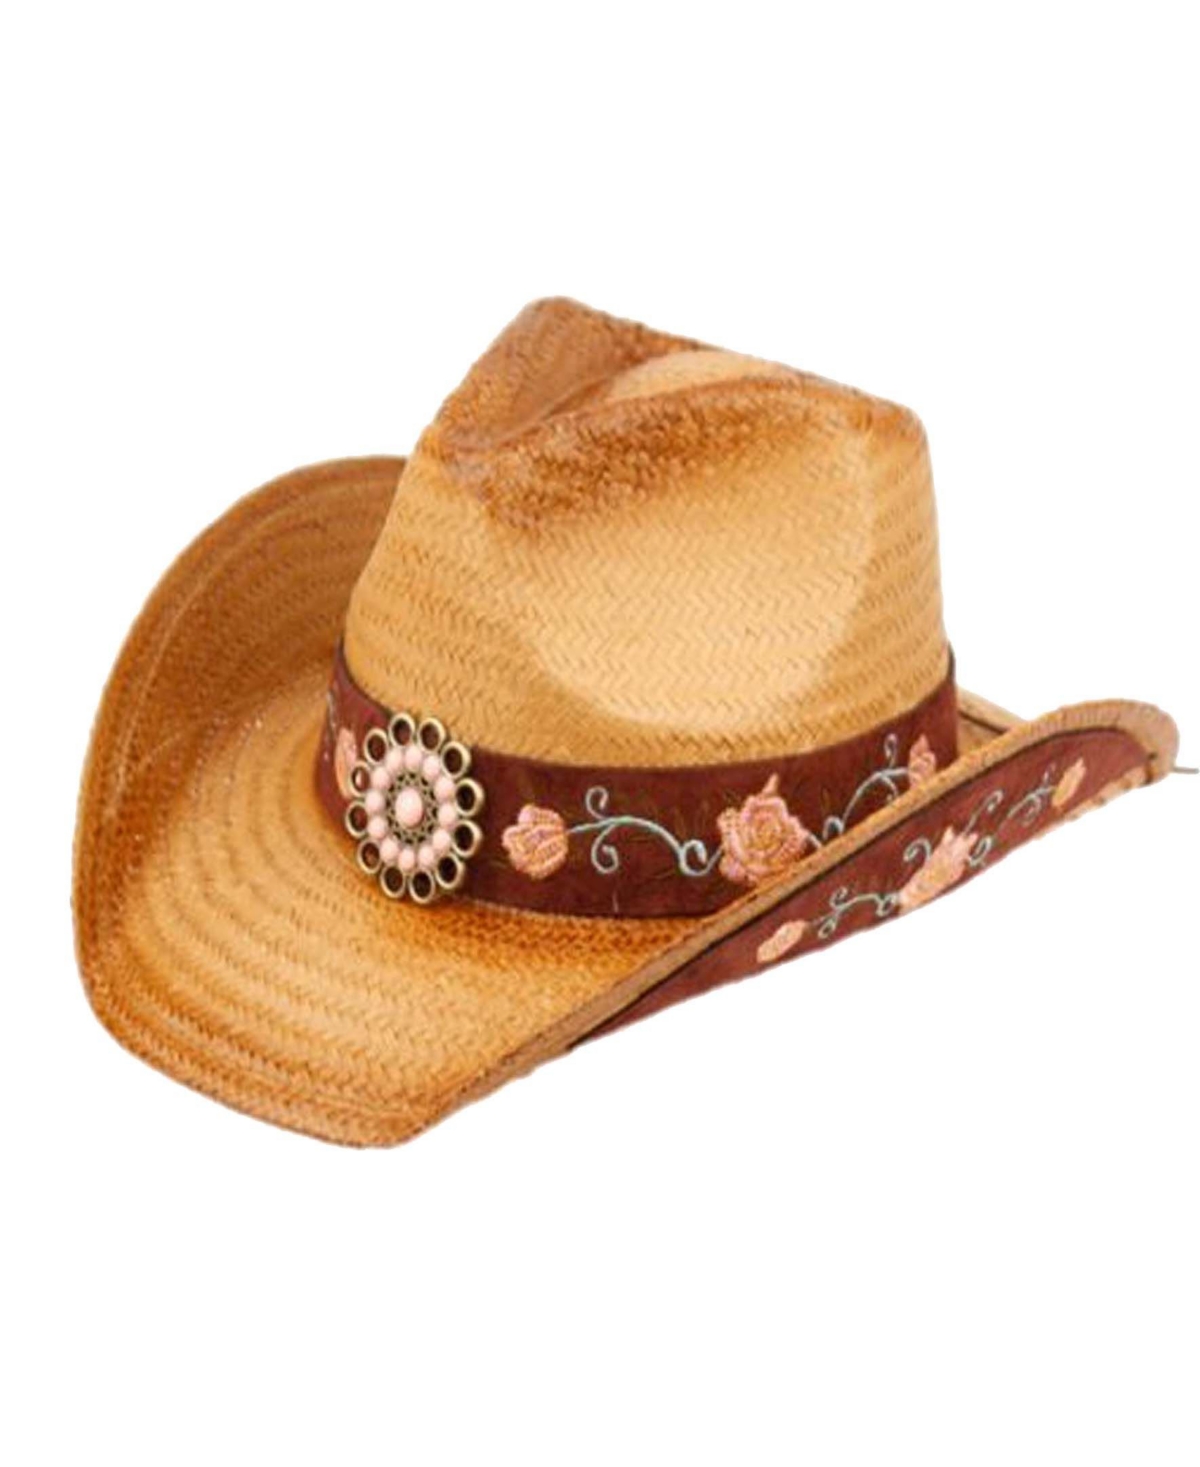 Cowboy Hat with Floral Trim Band and Stud - Natural